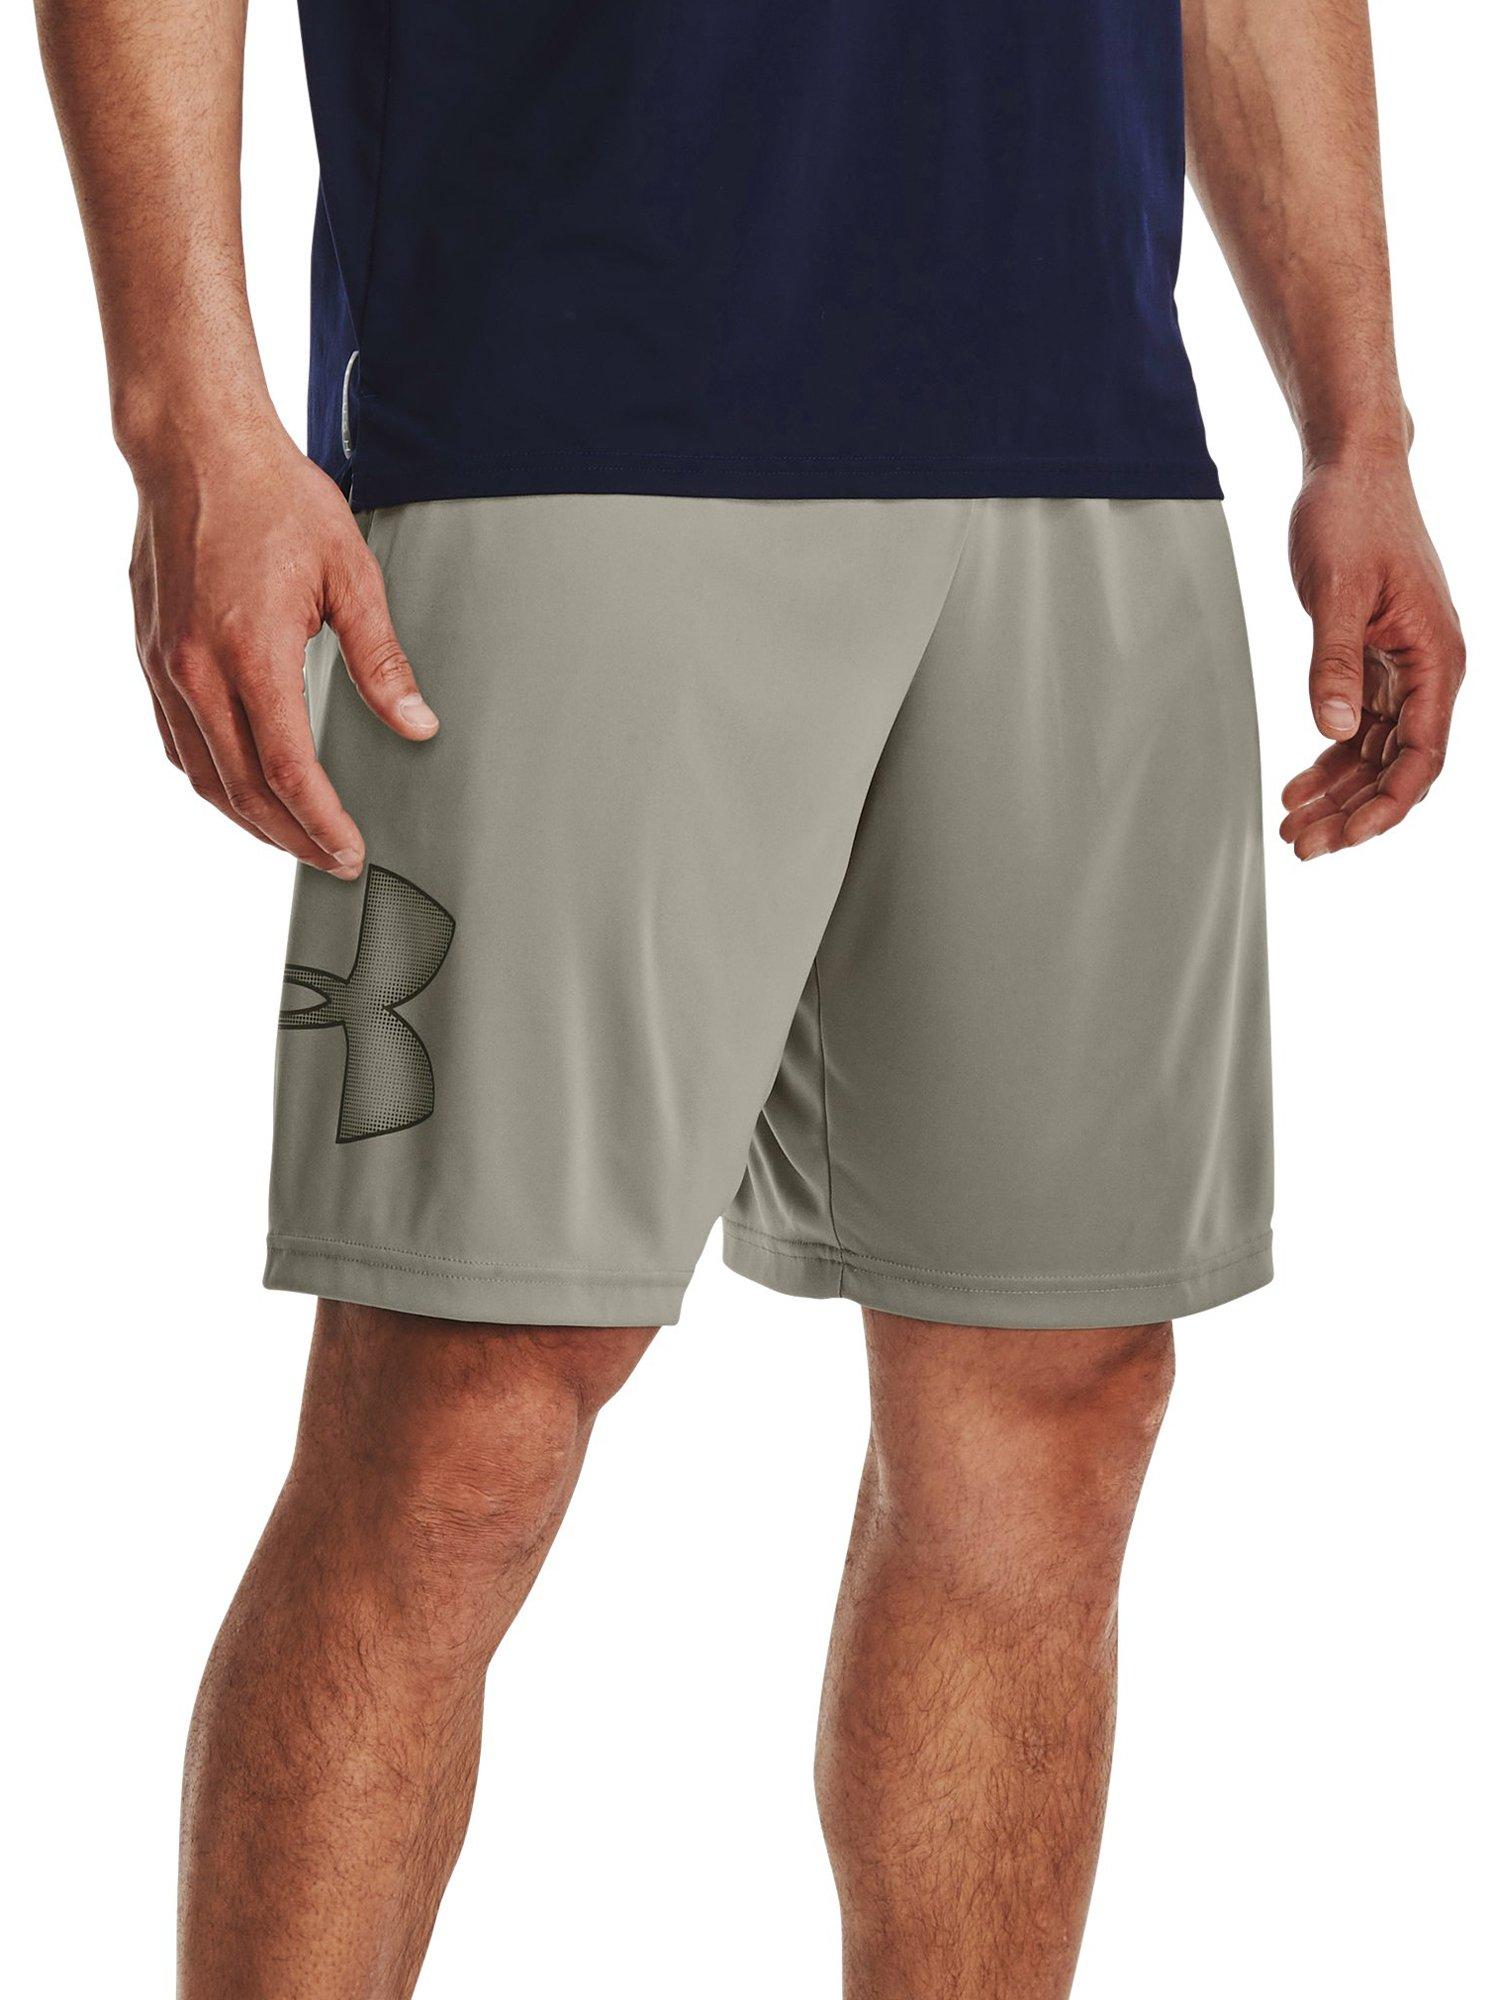 Mens Under Armour Tech Graphic Unlined Shorts